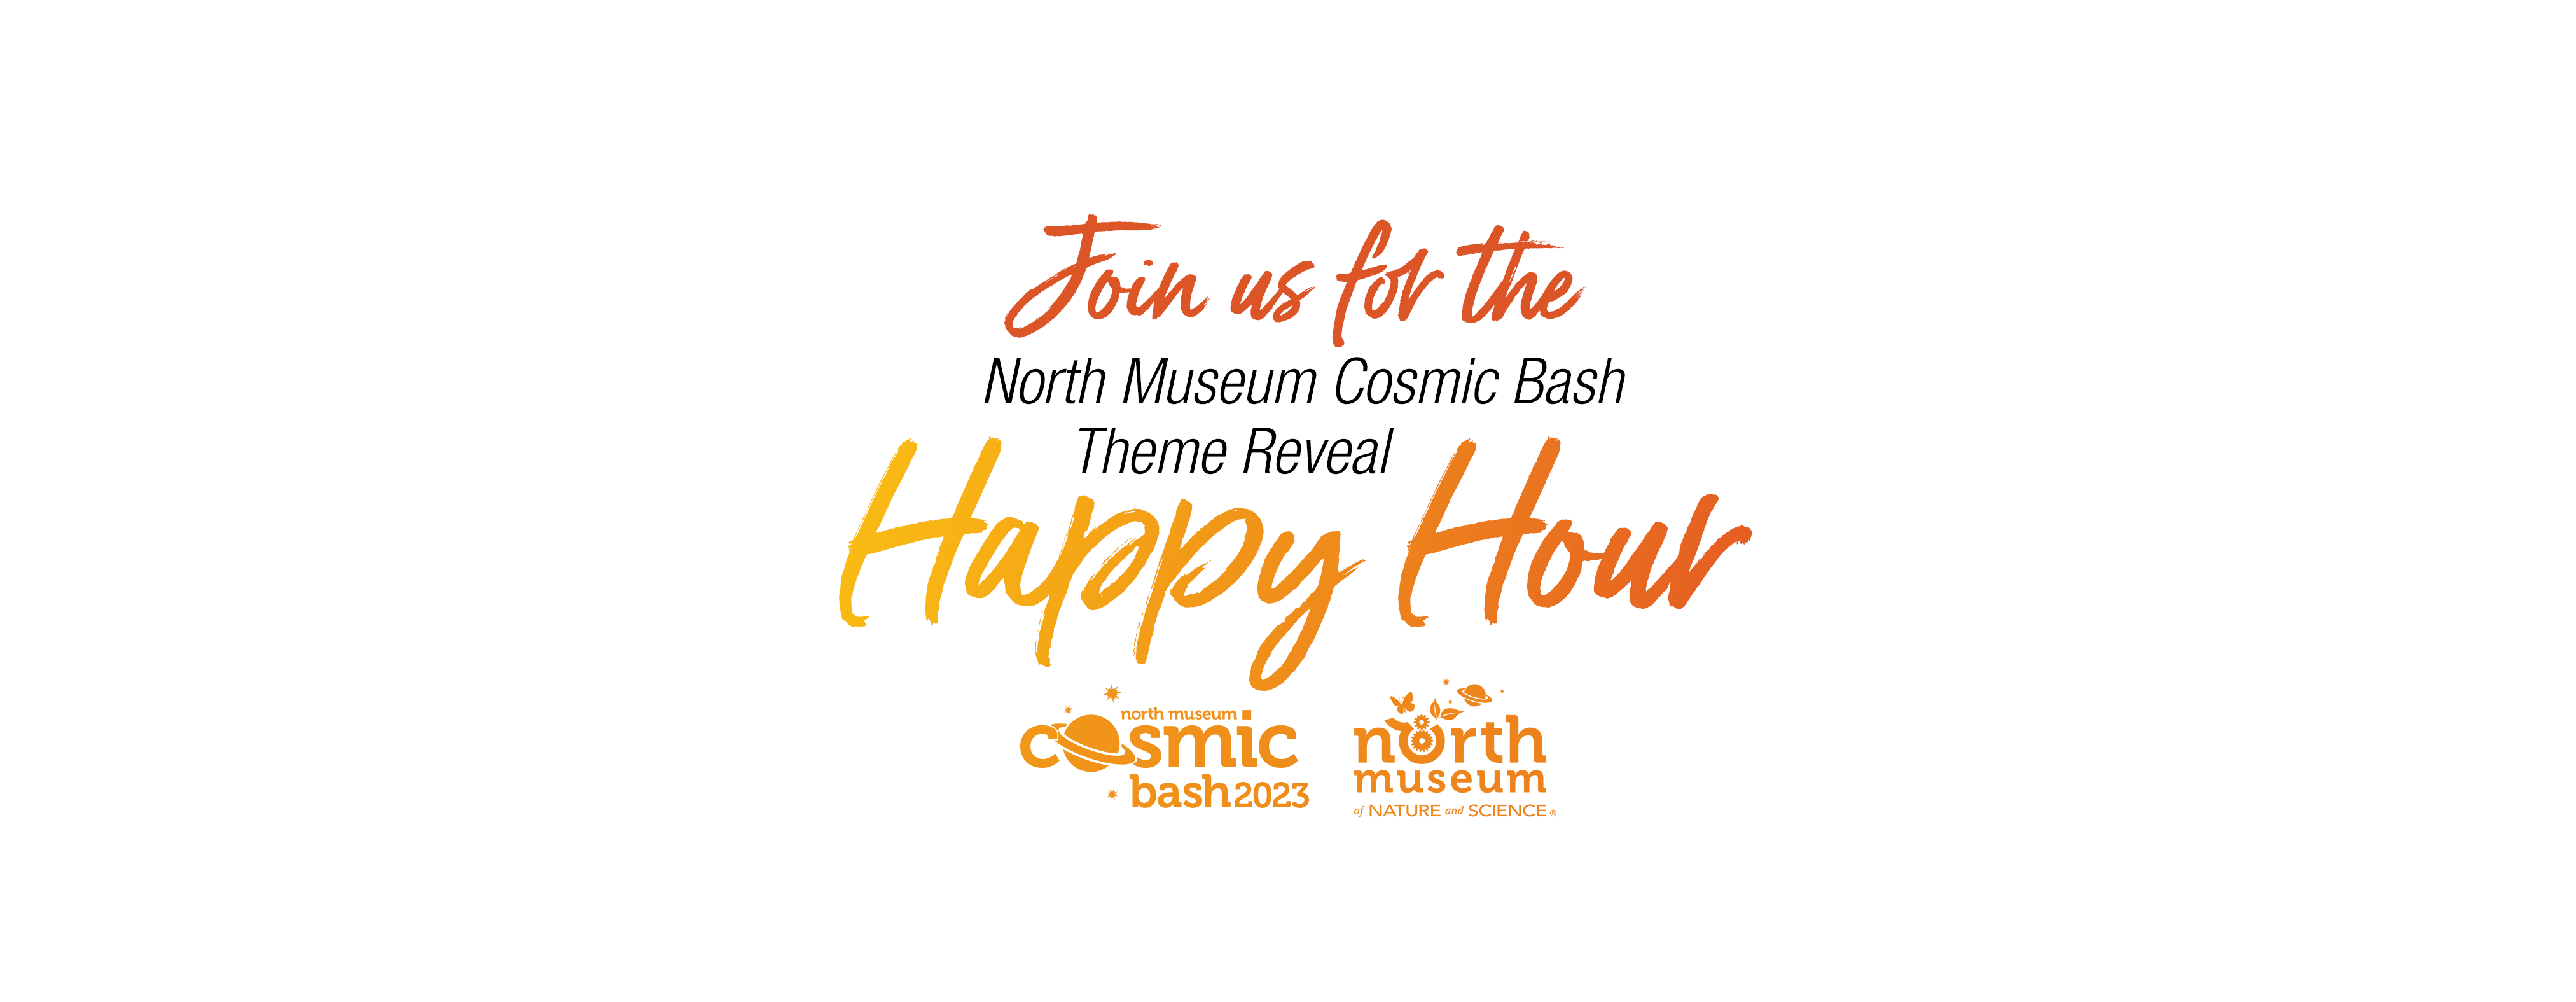 Cosmic Bash Theme Reveal 2022 North Museum